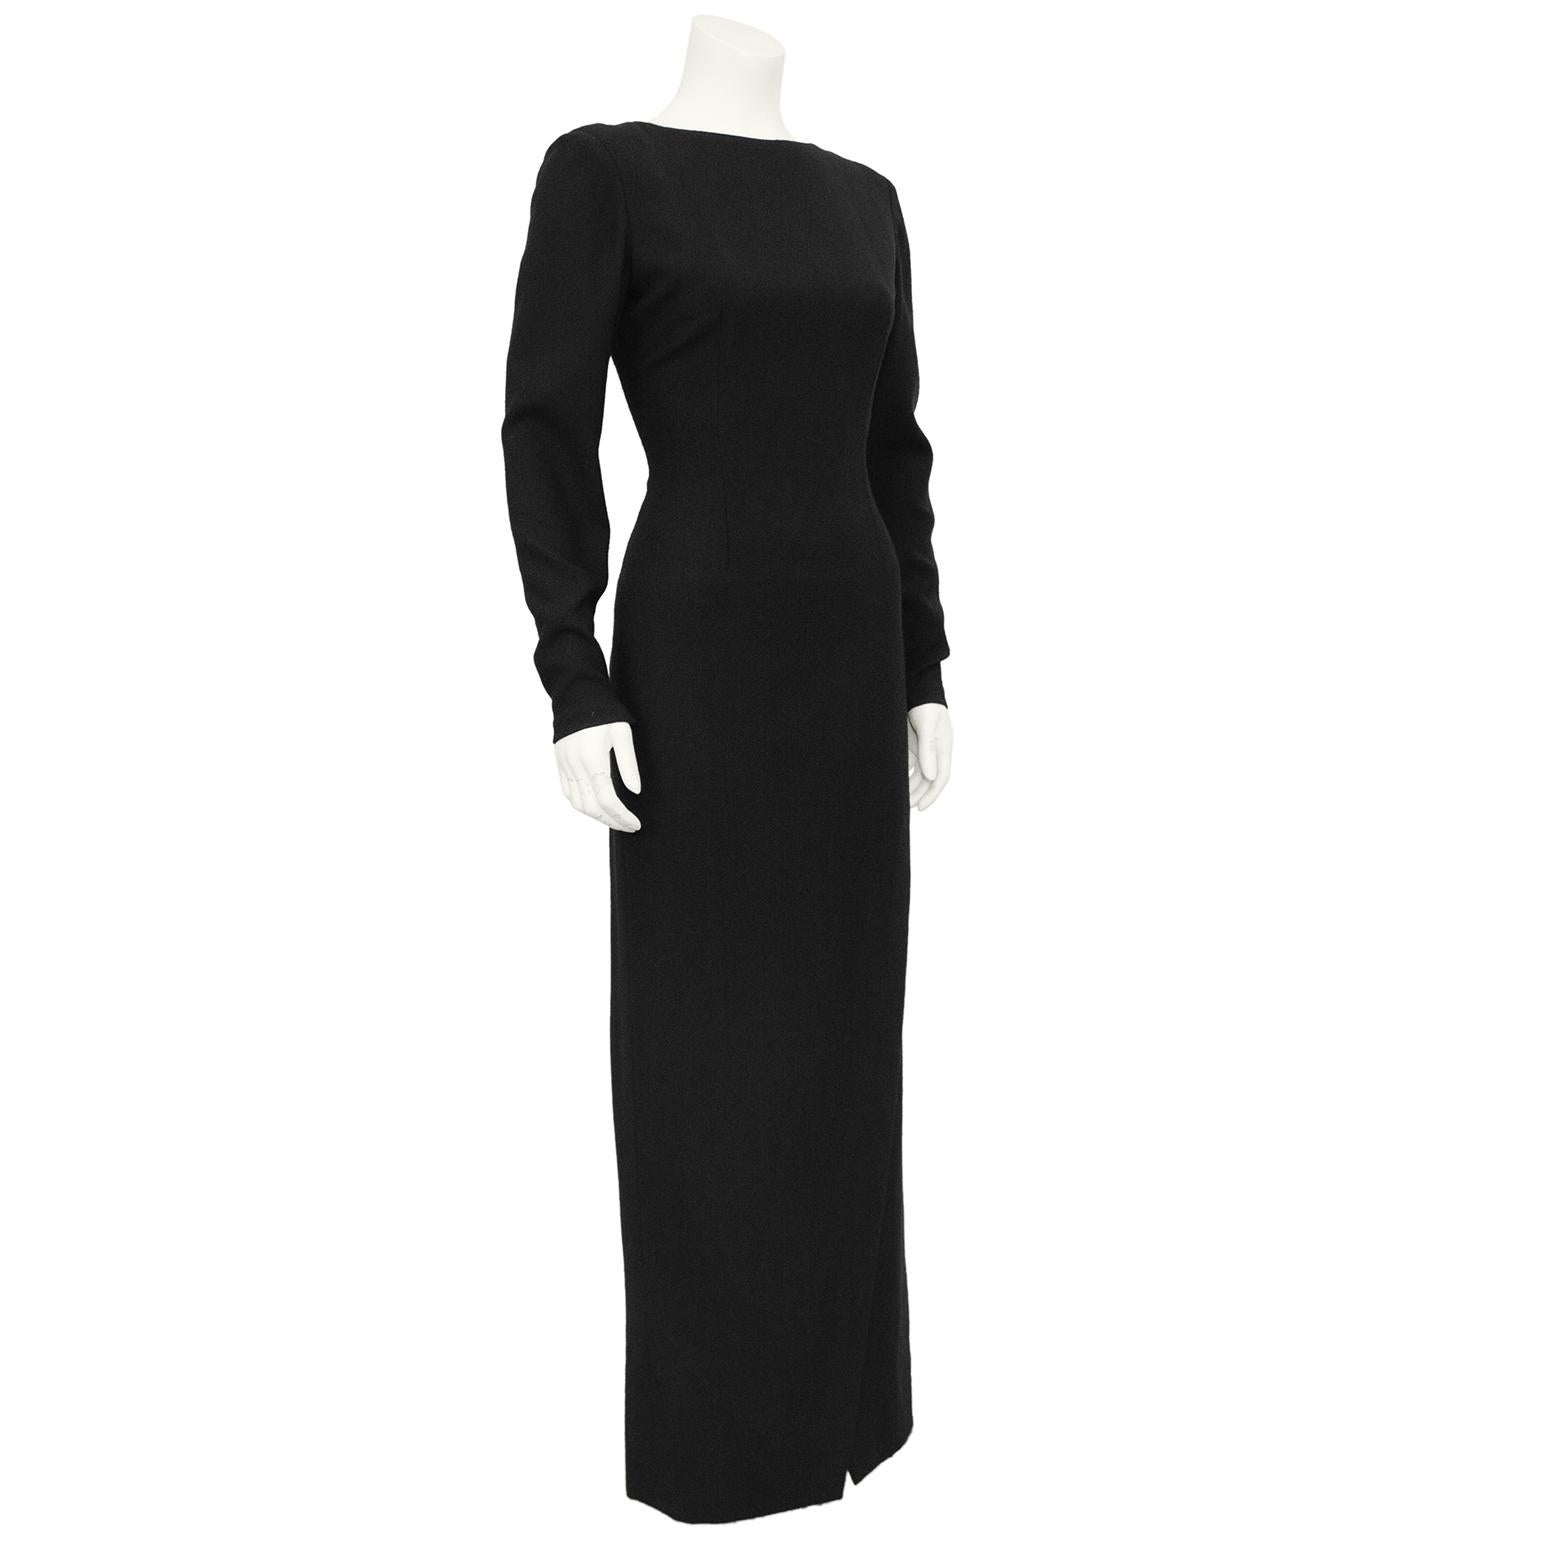 1970s Bill Blass Black Wool Crepe Gown with Cut Out Criss Cross Back  In Good Condition For Sale In Toronto, Ontario